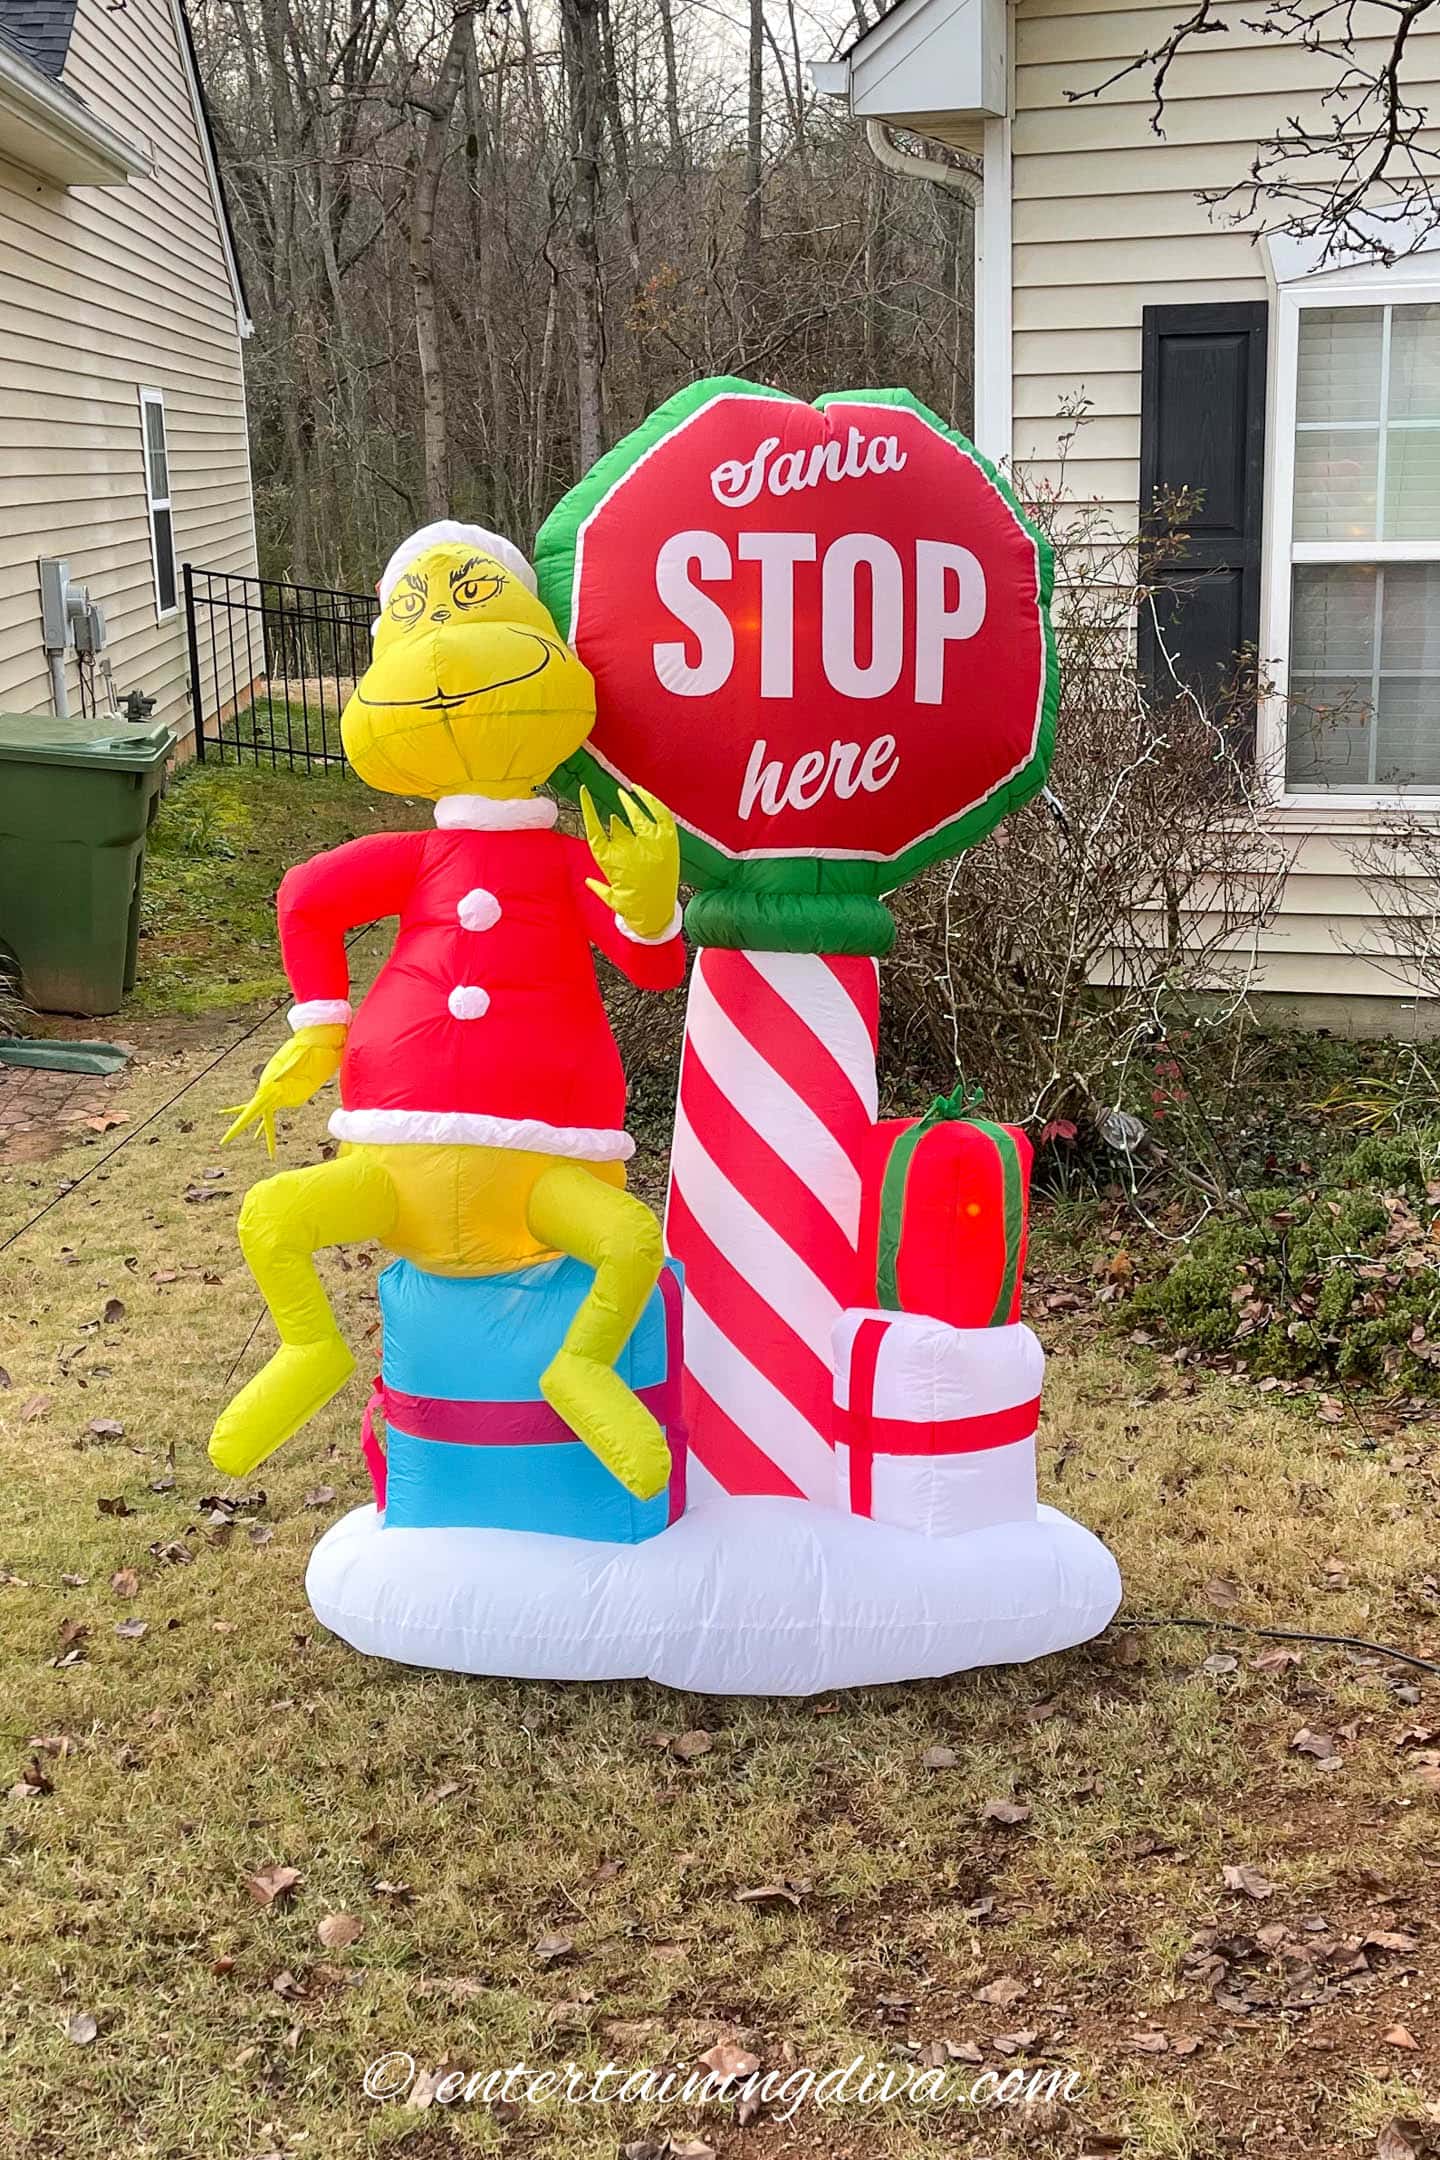 Grinch inflatable with a Santa stop here sign